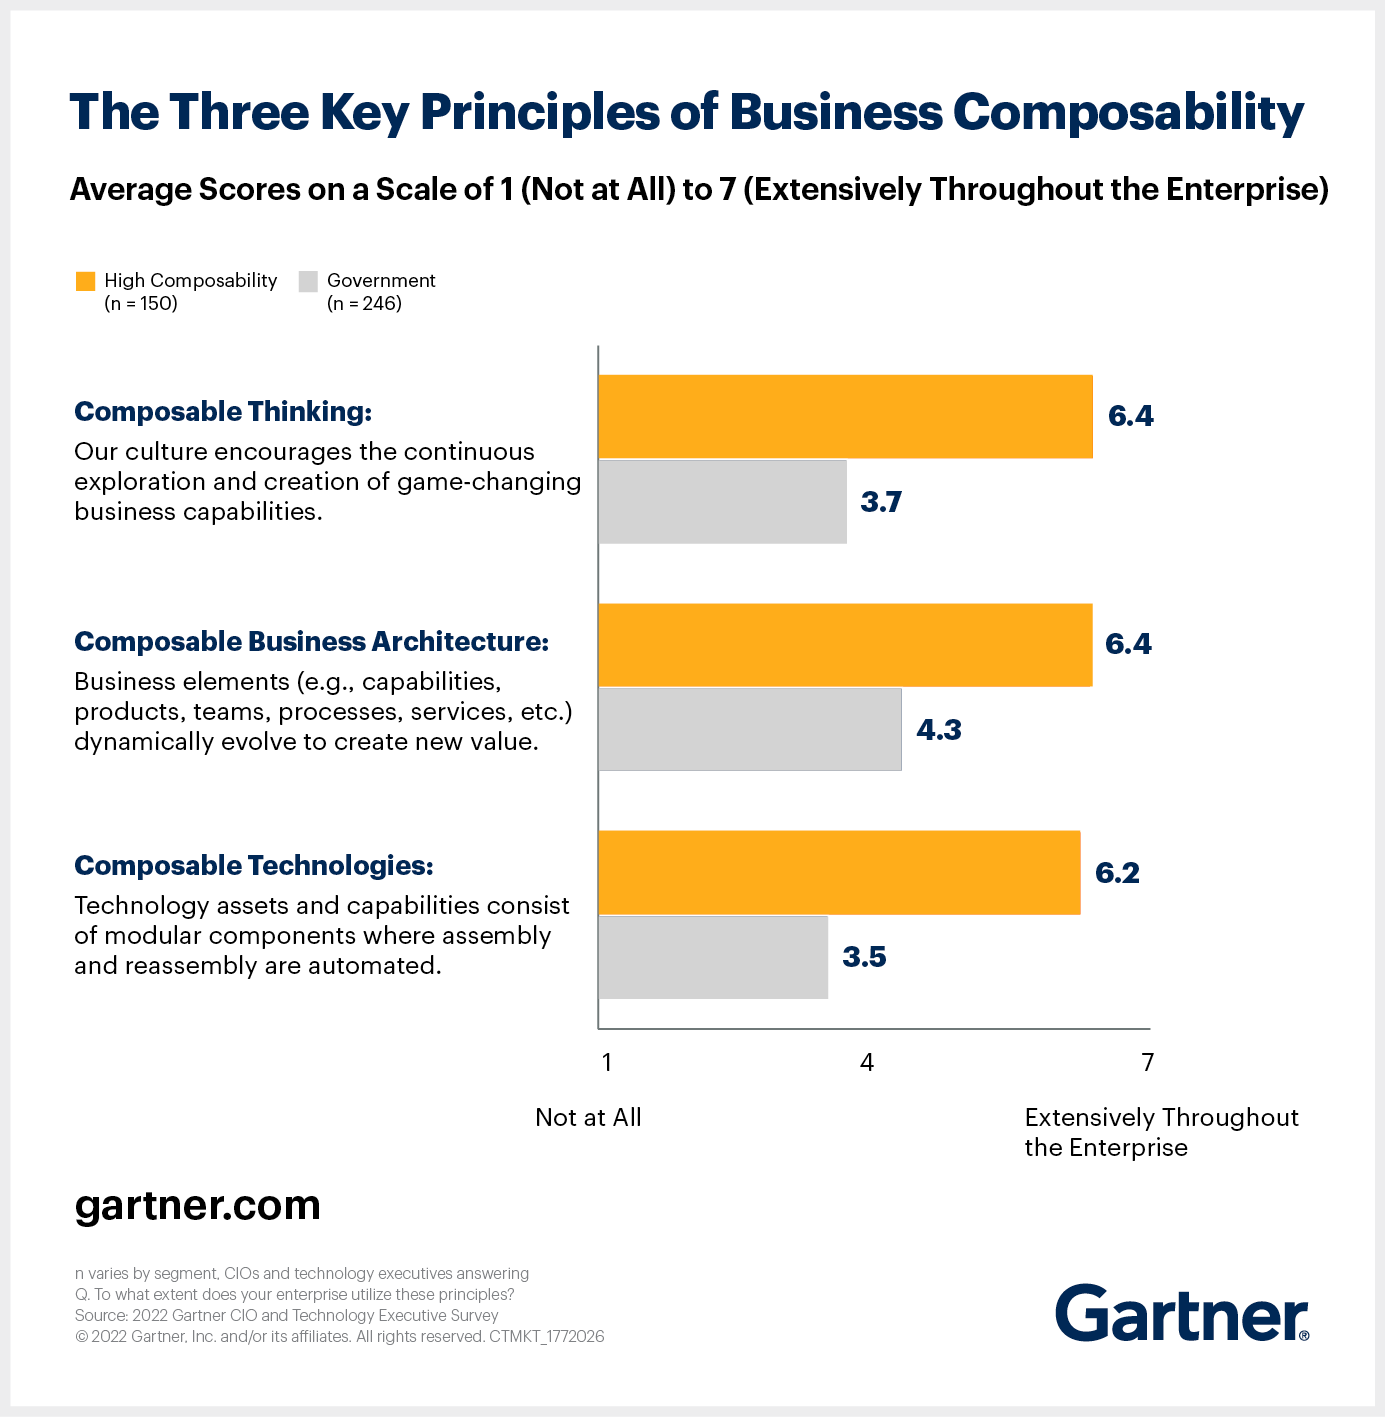 The Three Key Principles of Business Composability